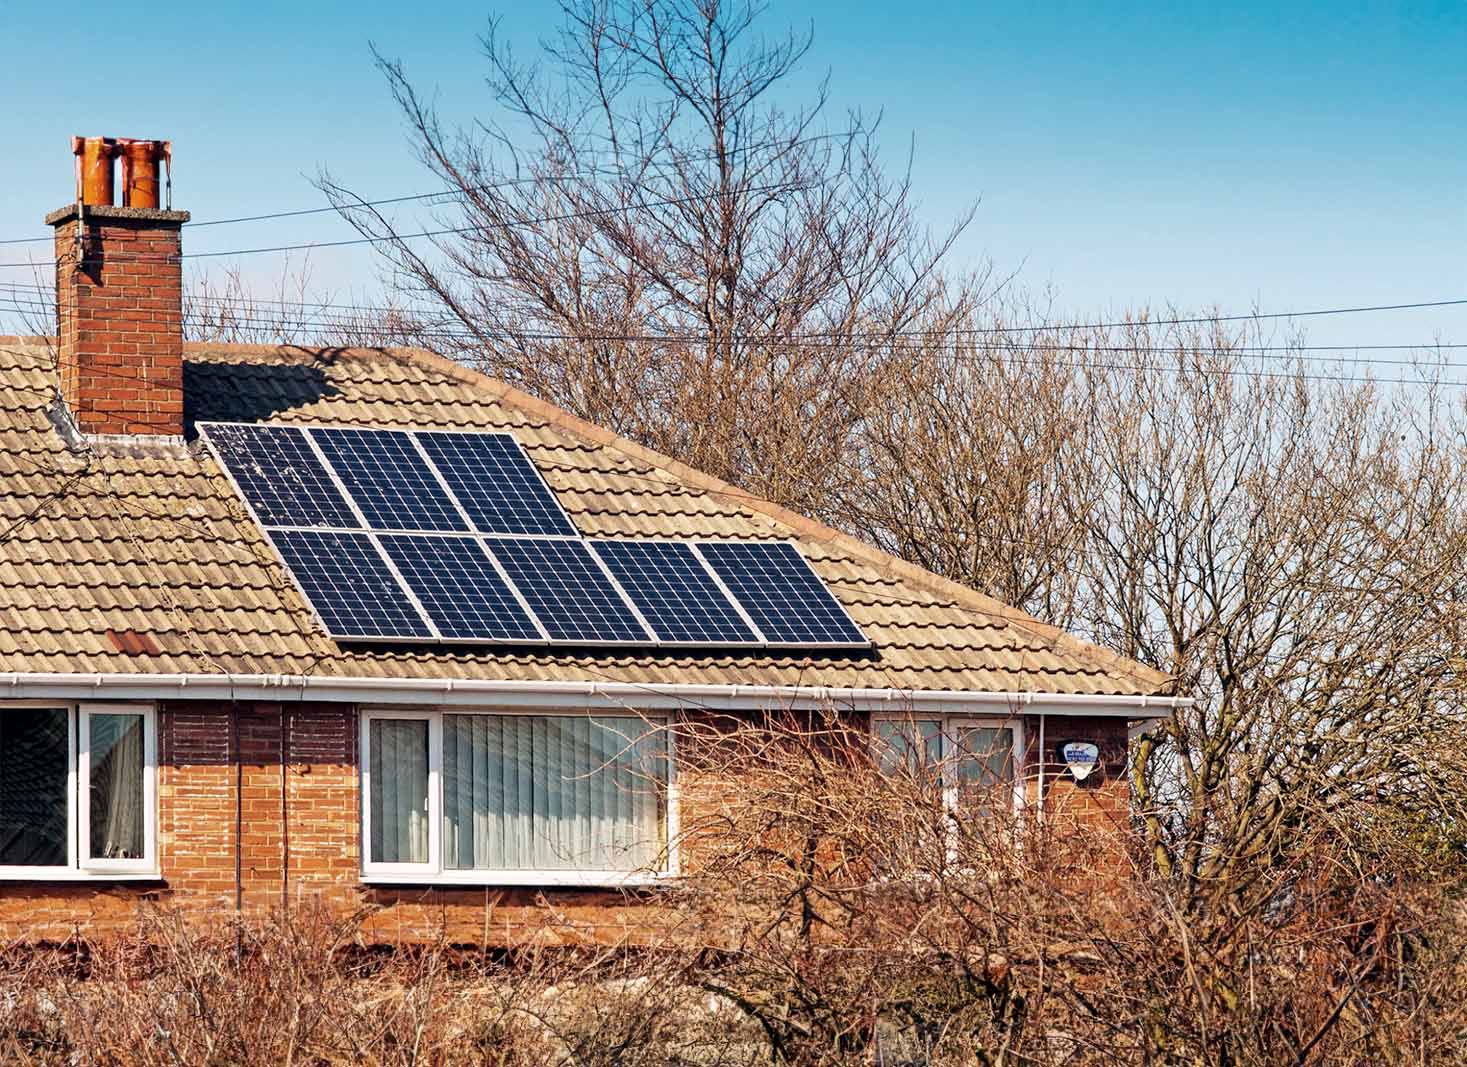 A residential solar panel system